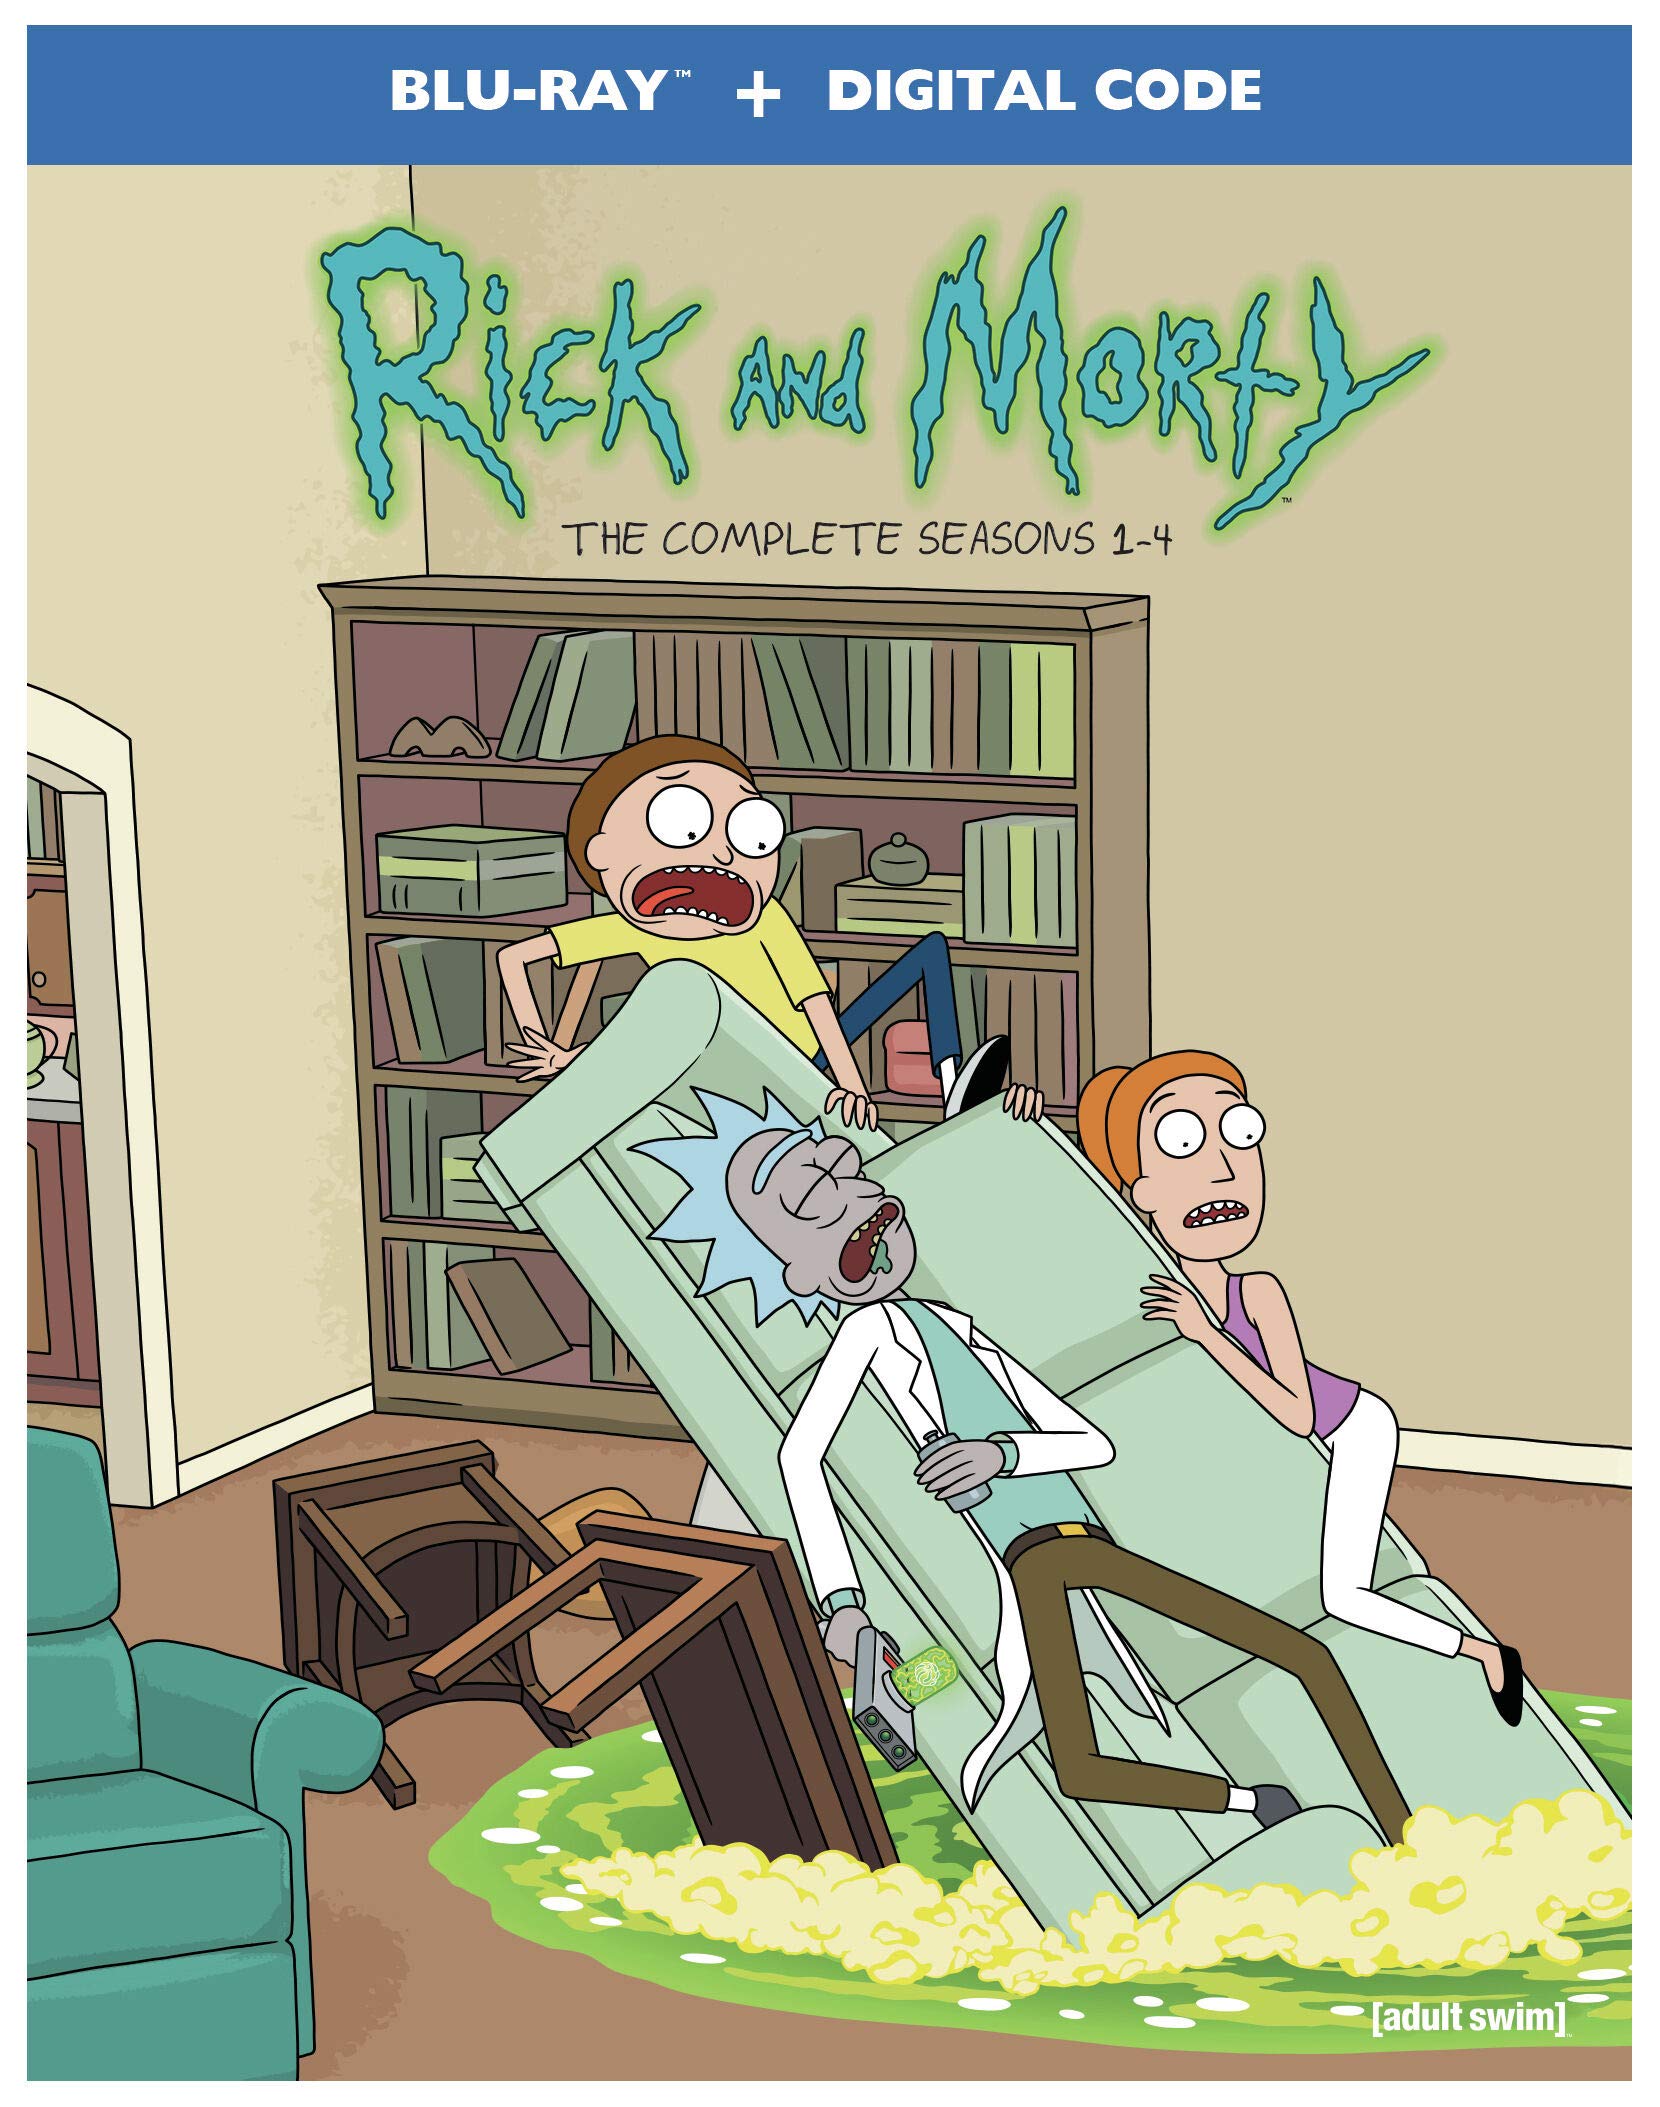 Rick and Morty: Seasons 1-4 (Blu-ray) $22.18 + Free Shipping w/ Prime or on $35+